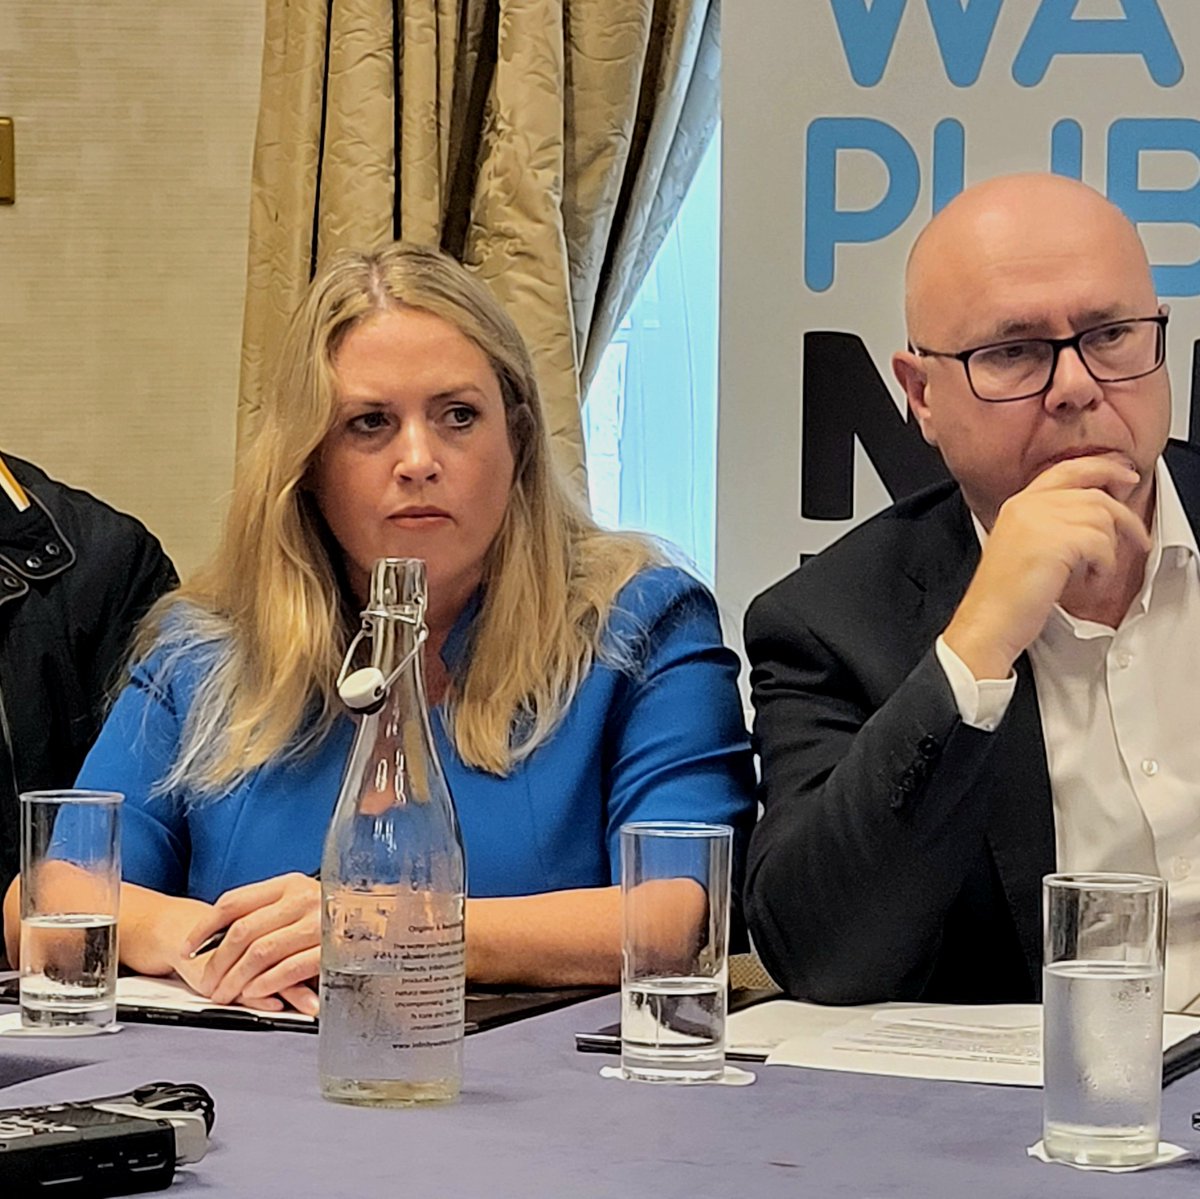 #KeepWaterPublic 'Our members who work across local services have been clear to us. They want the date to be named for the referendum on public ownership of water,  and they don't want anymore delays' - Fórsa's Catherine Keogh at today's campaign launch for @keep_public